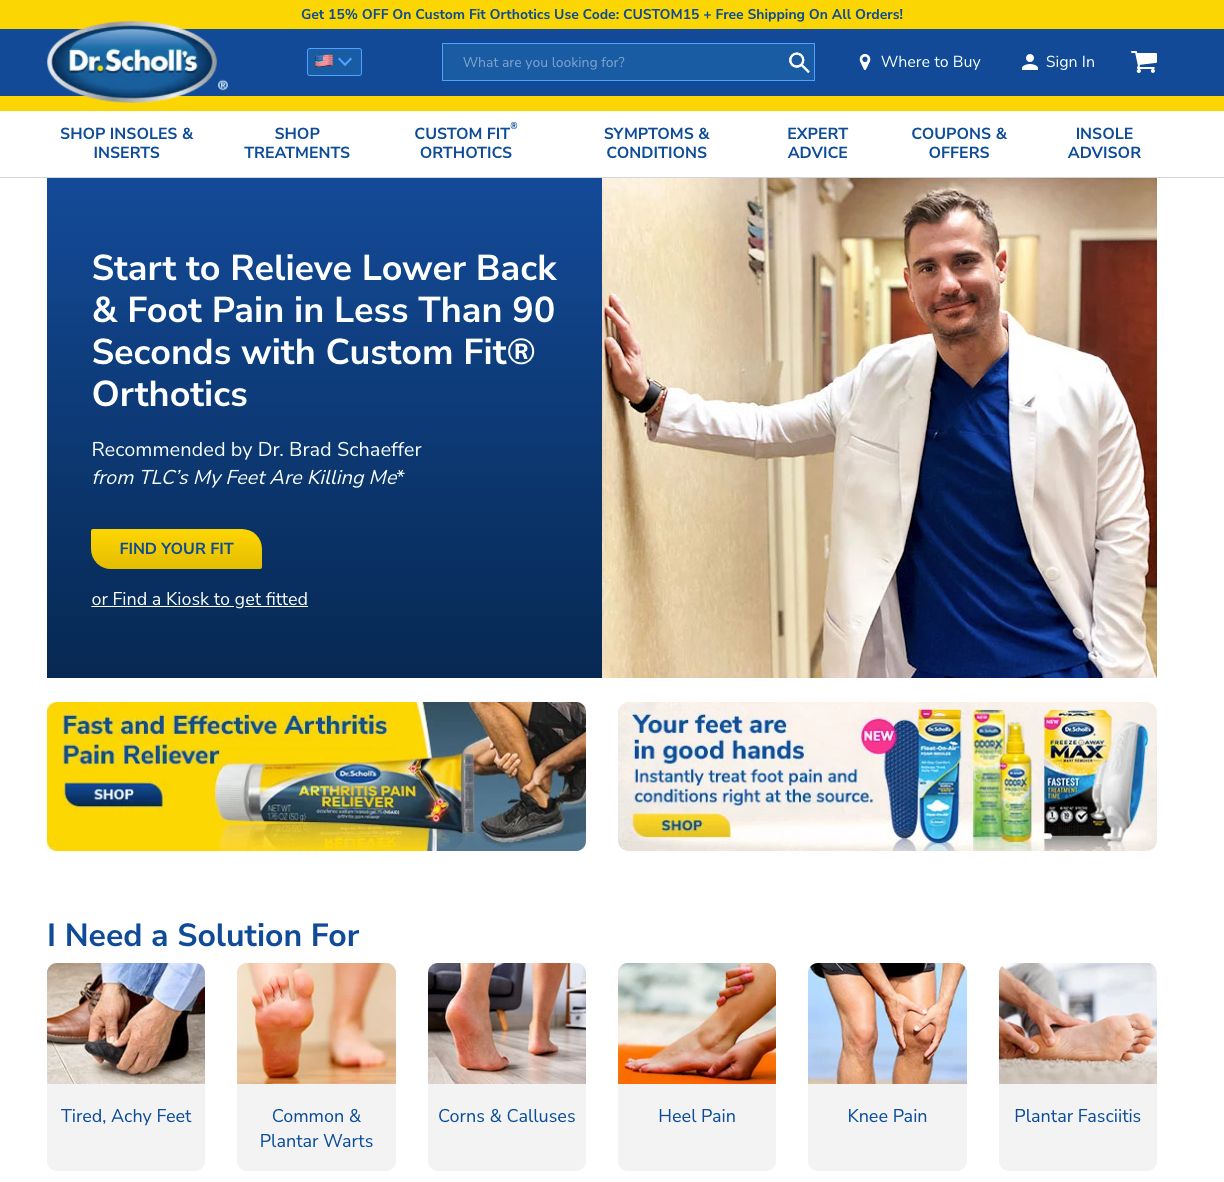 One WordPress ecommerce website example is Dr. Scholls, as seen in this screenshot of their online store